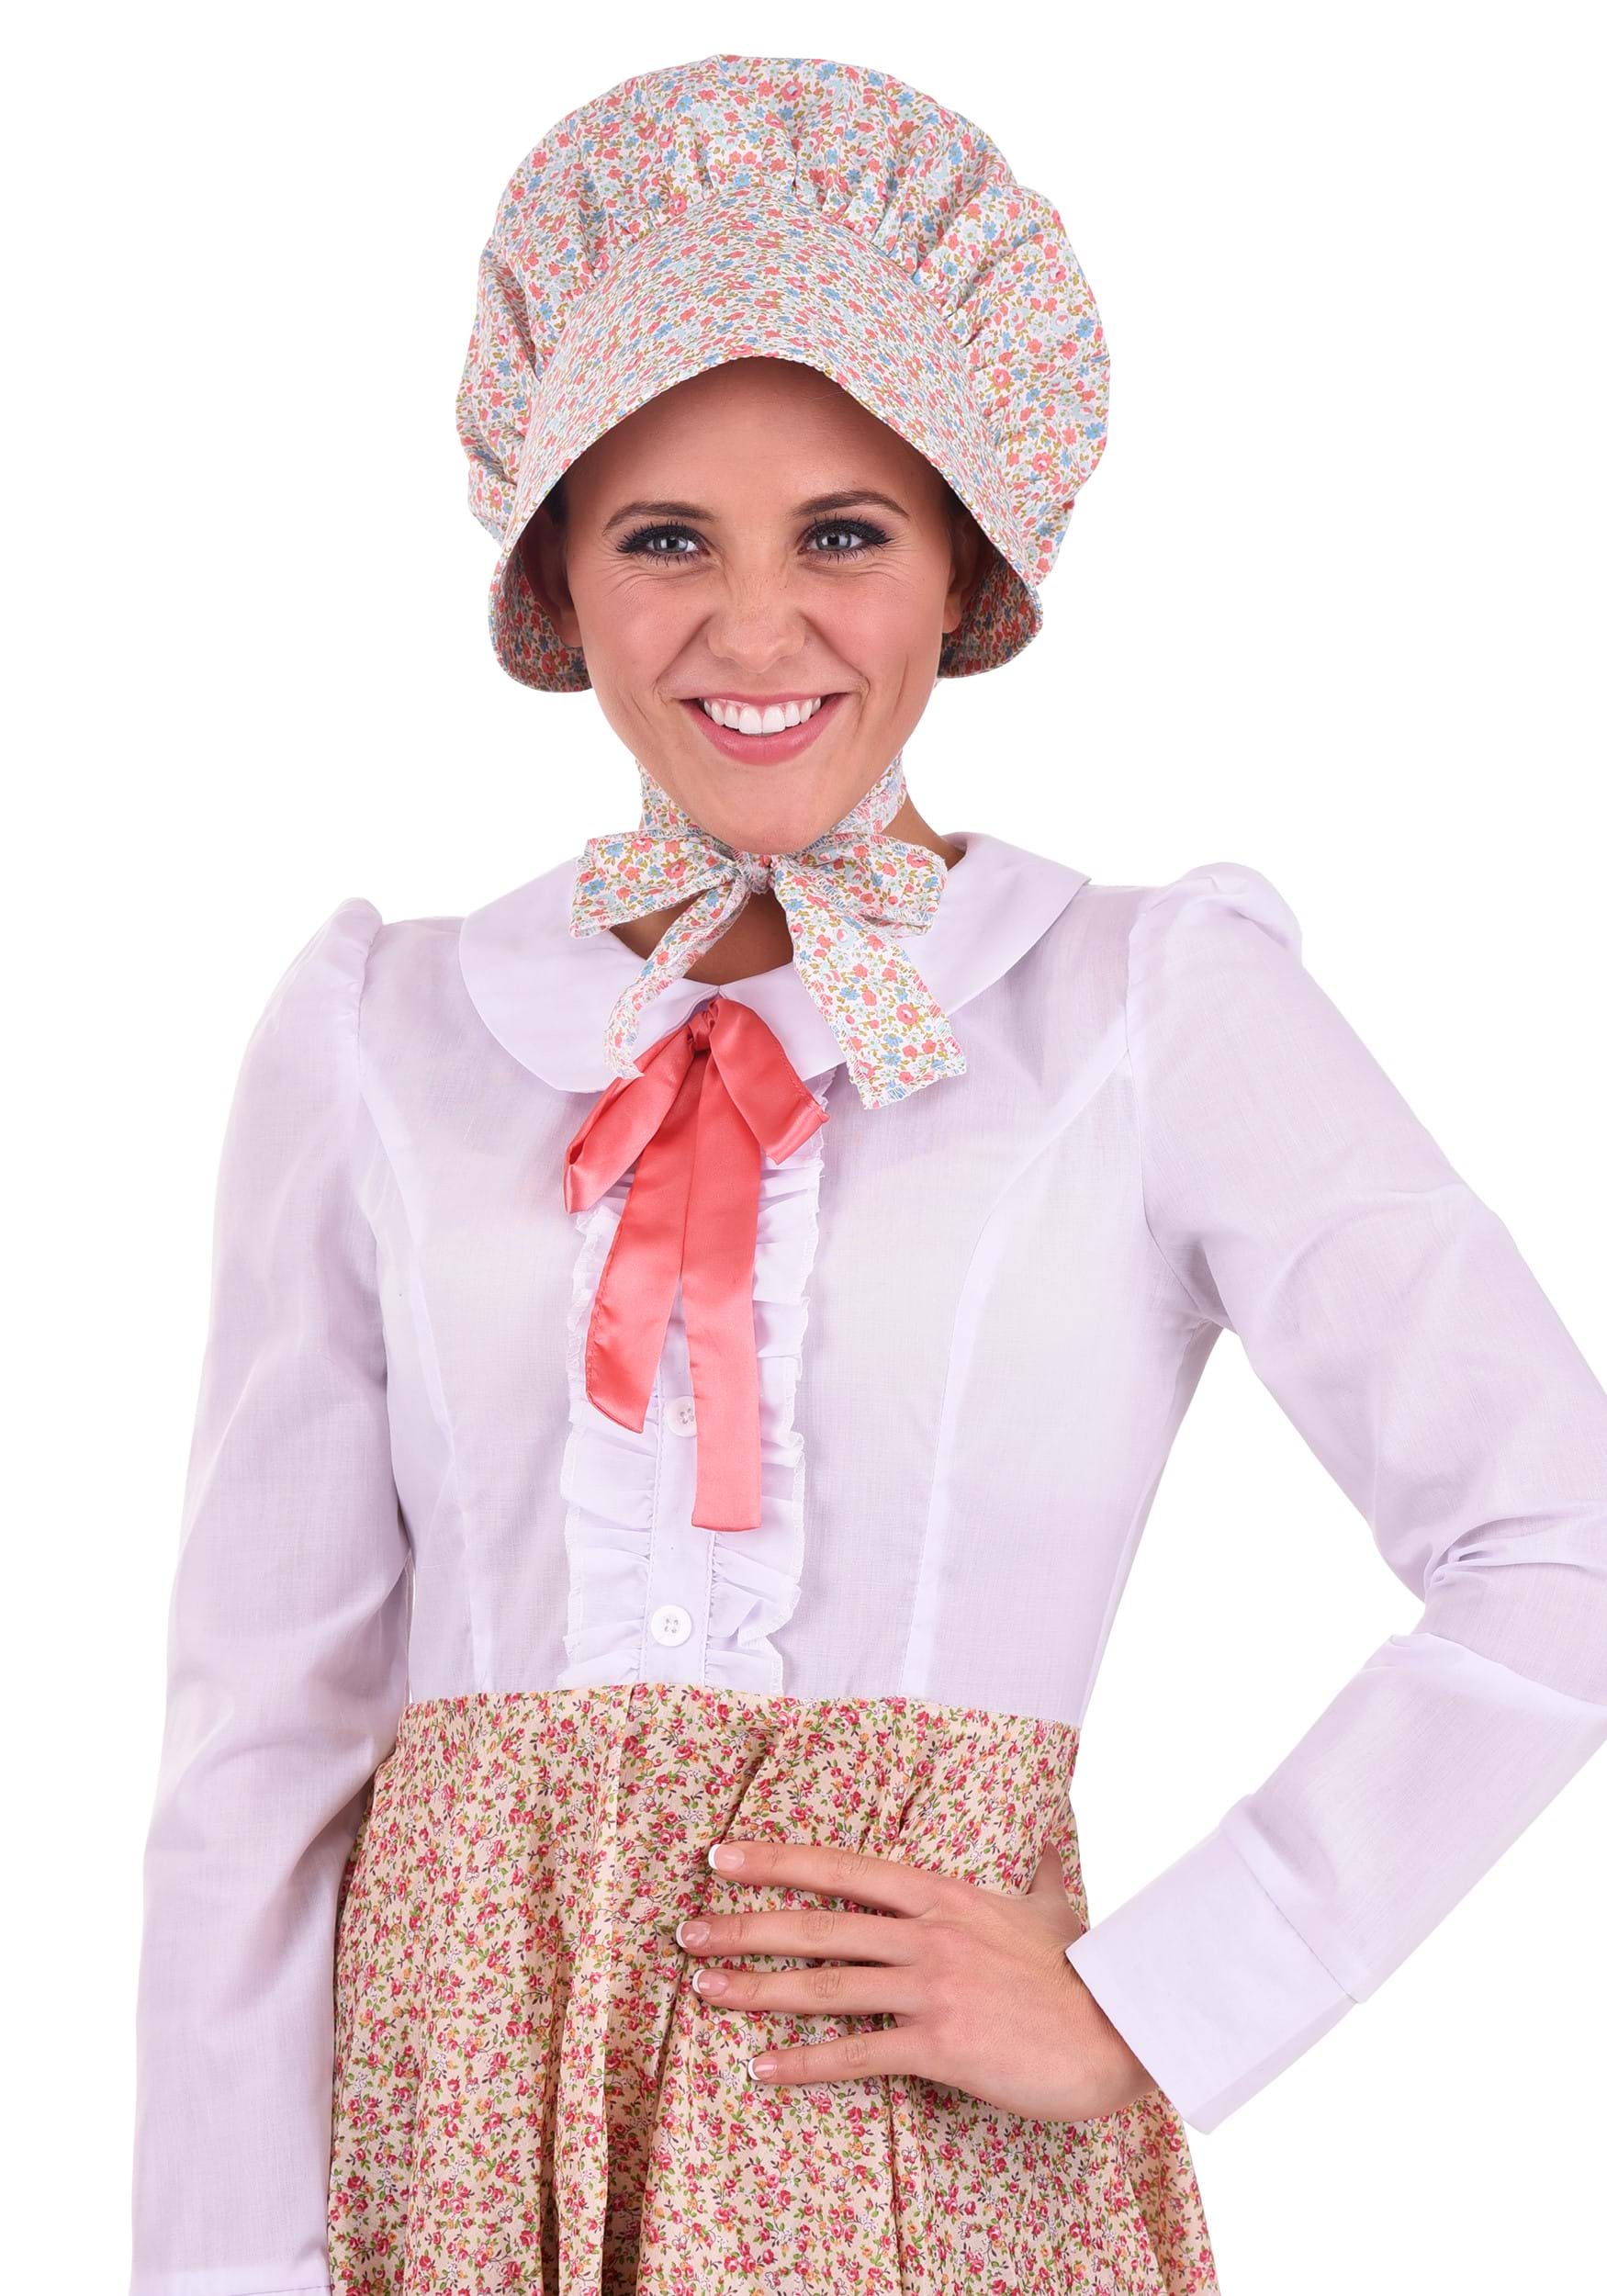 Little House on the Prairie Costume and Bonnet Tutorial (It's also